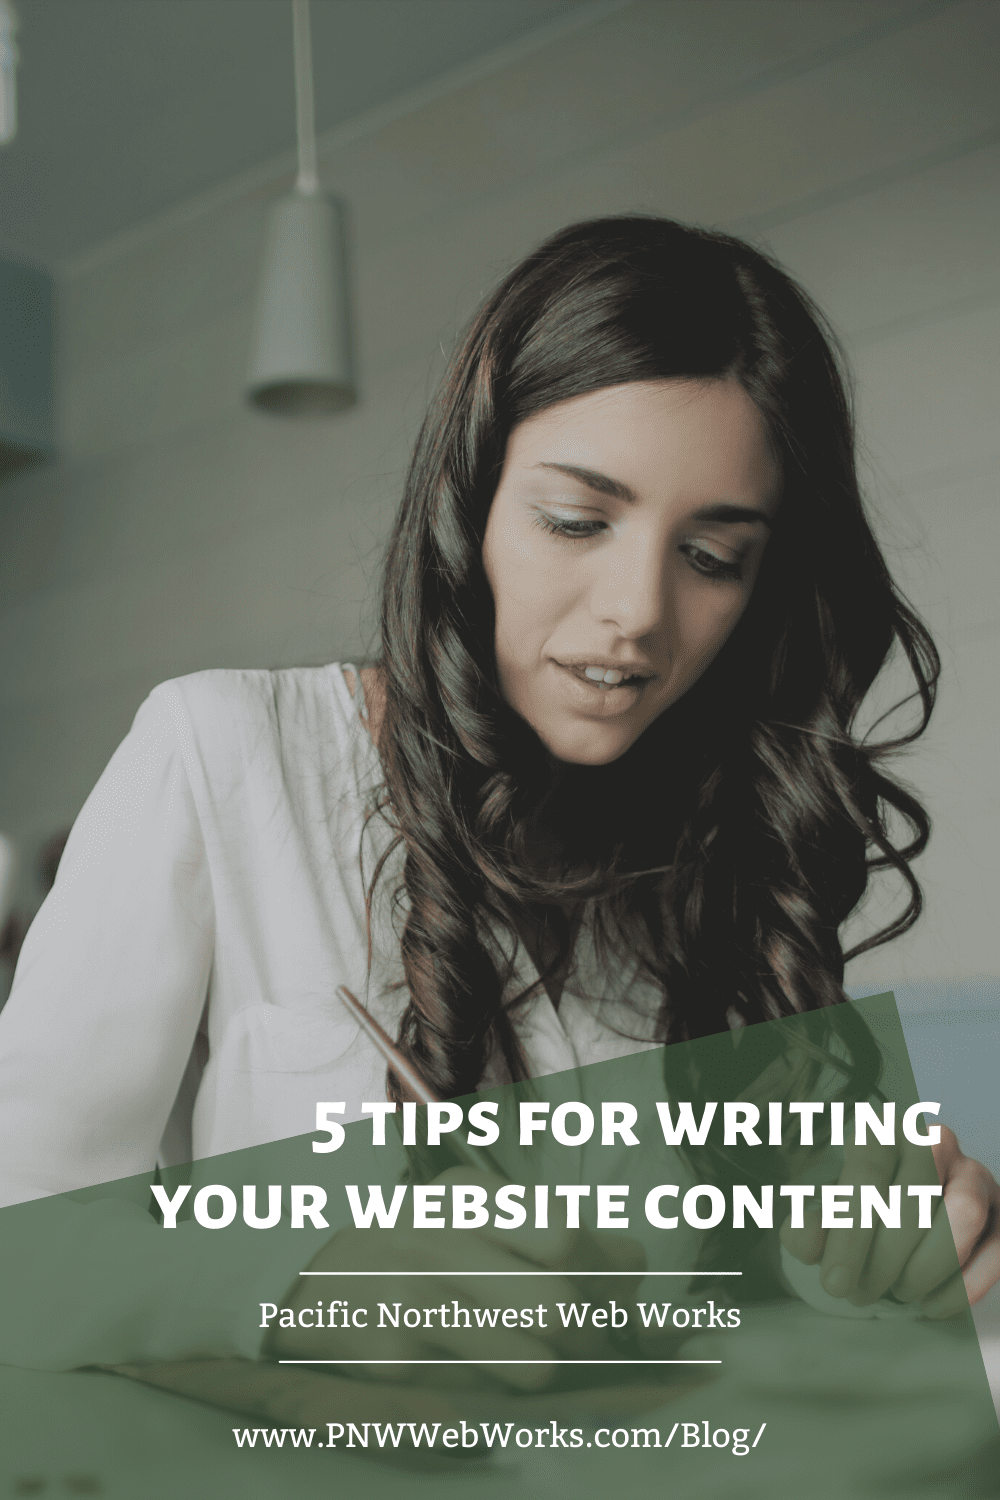 My top 5 tips for writing your website content